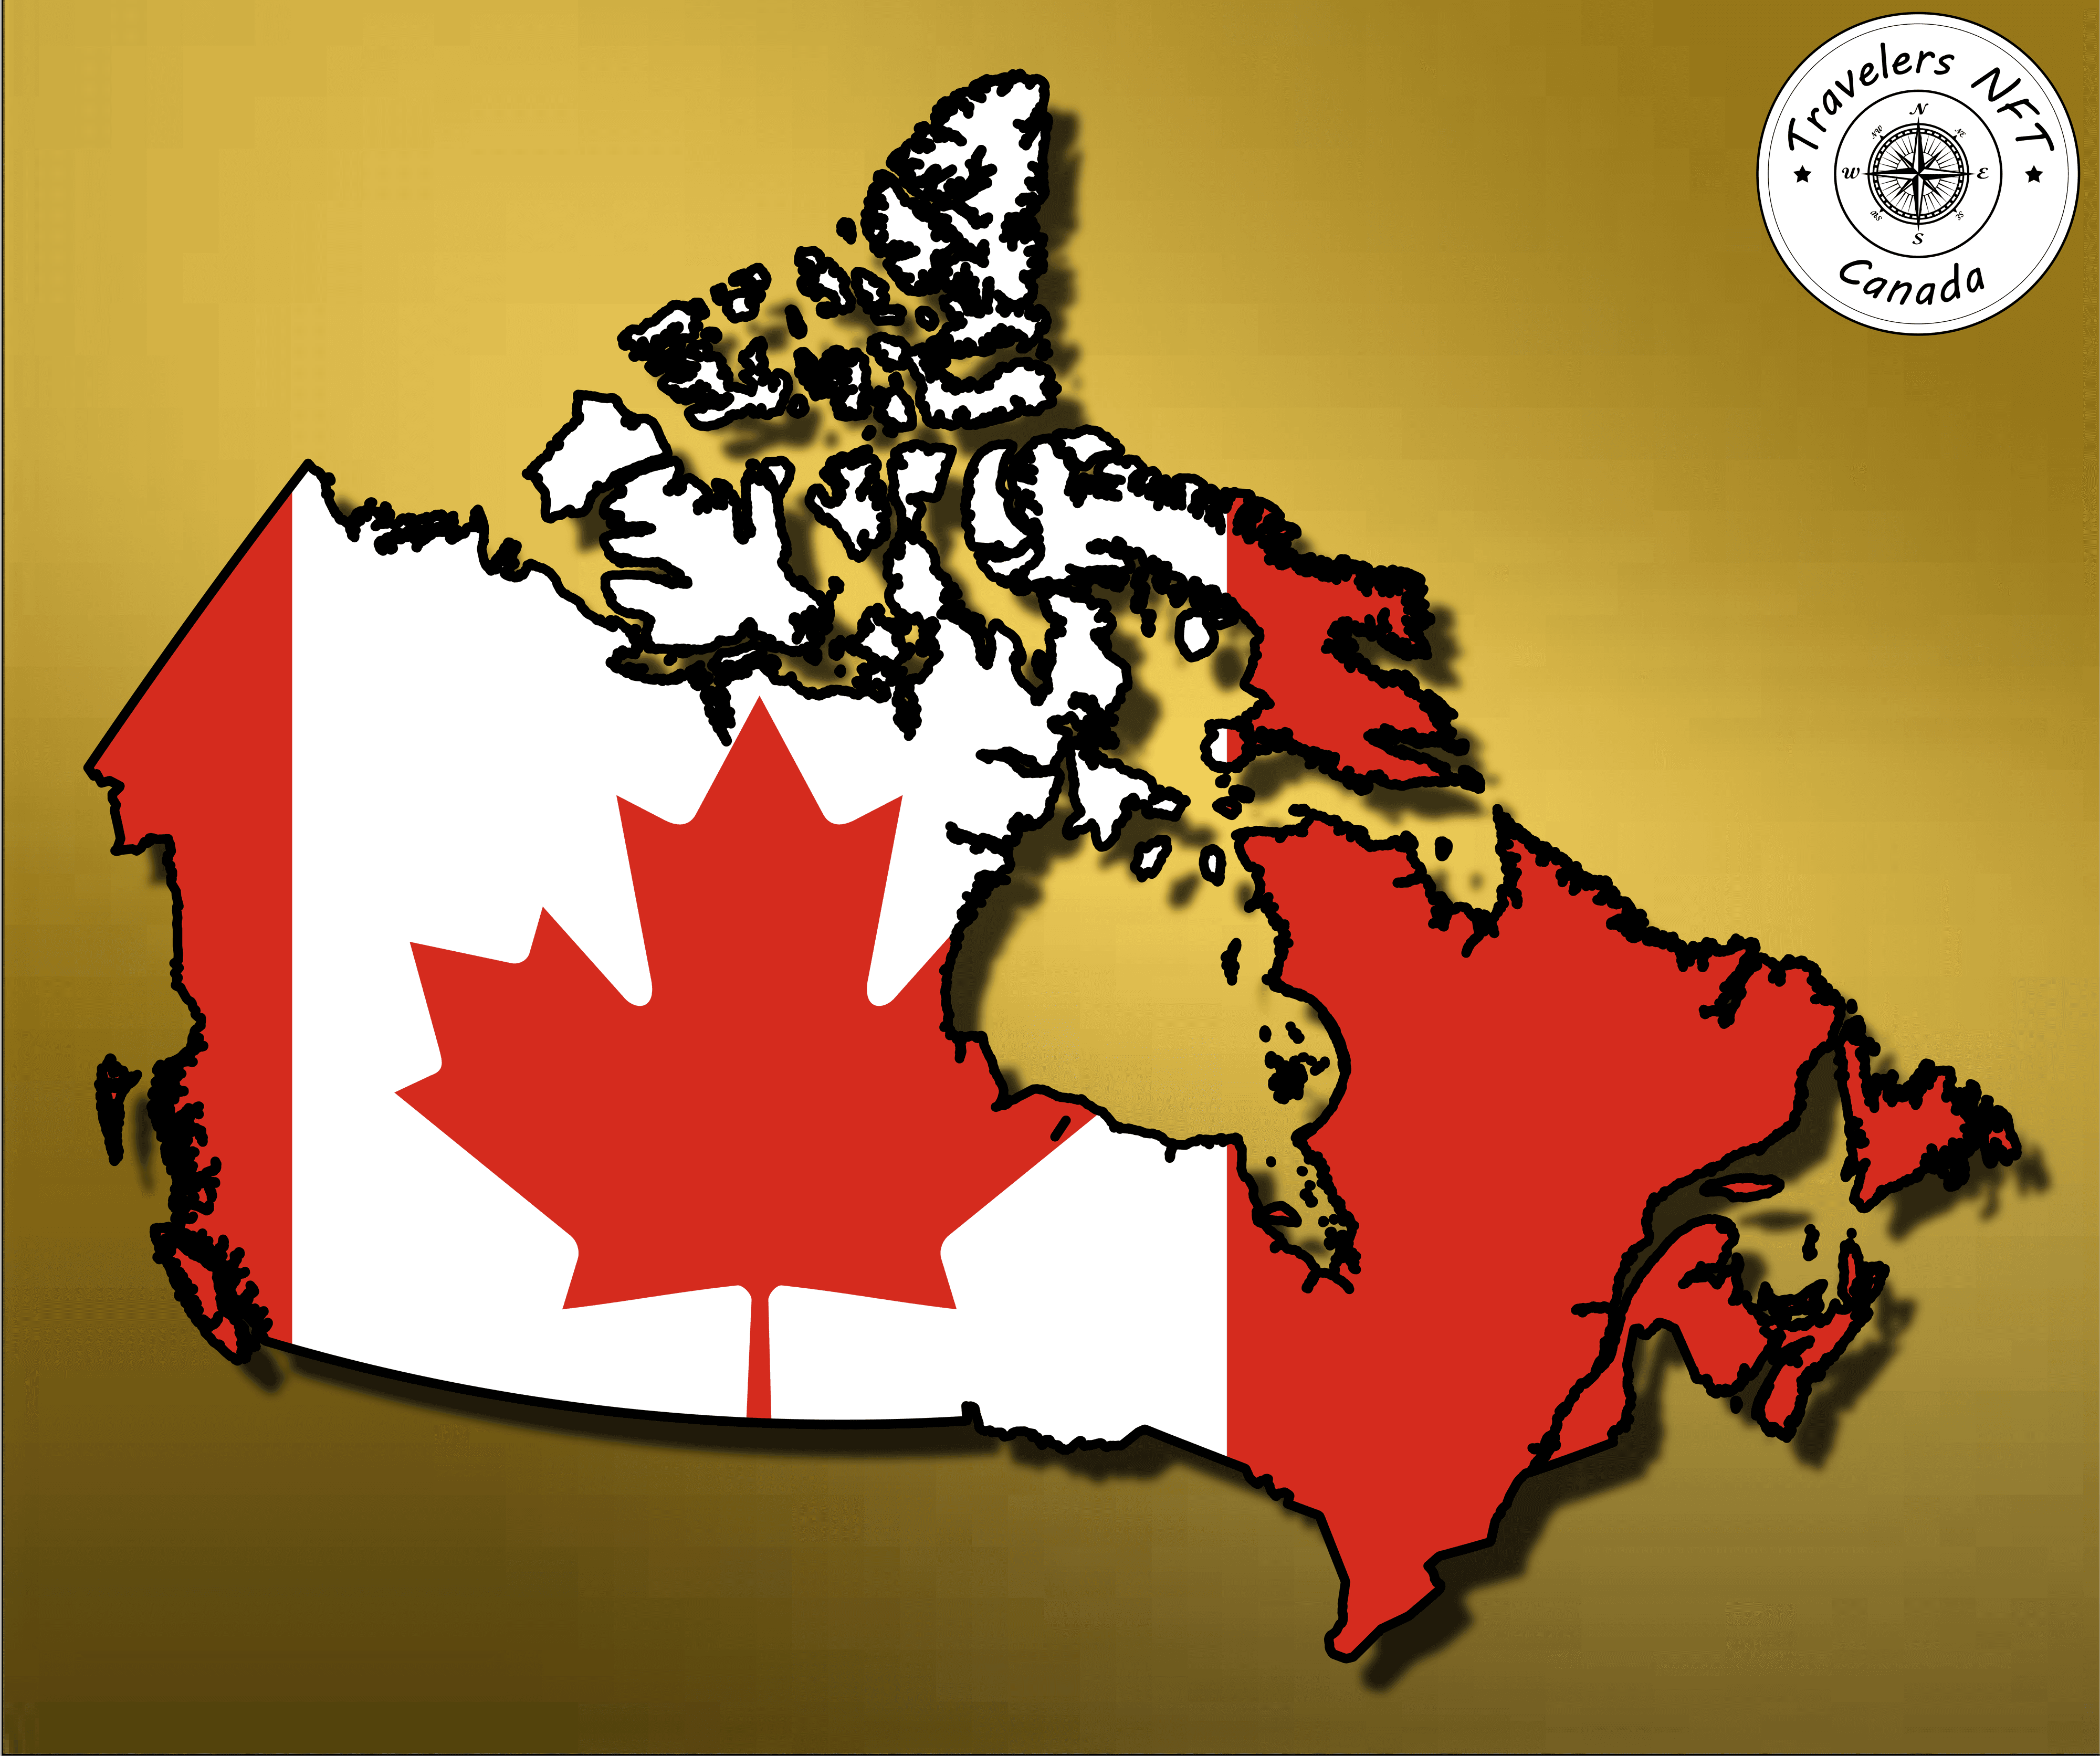 North American Countries - Canada